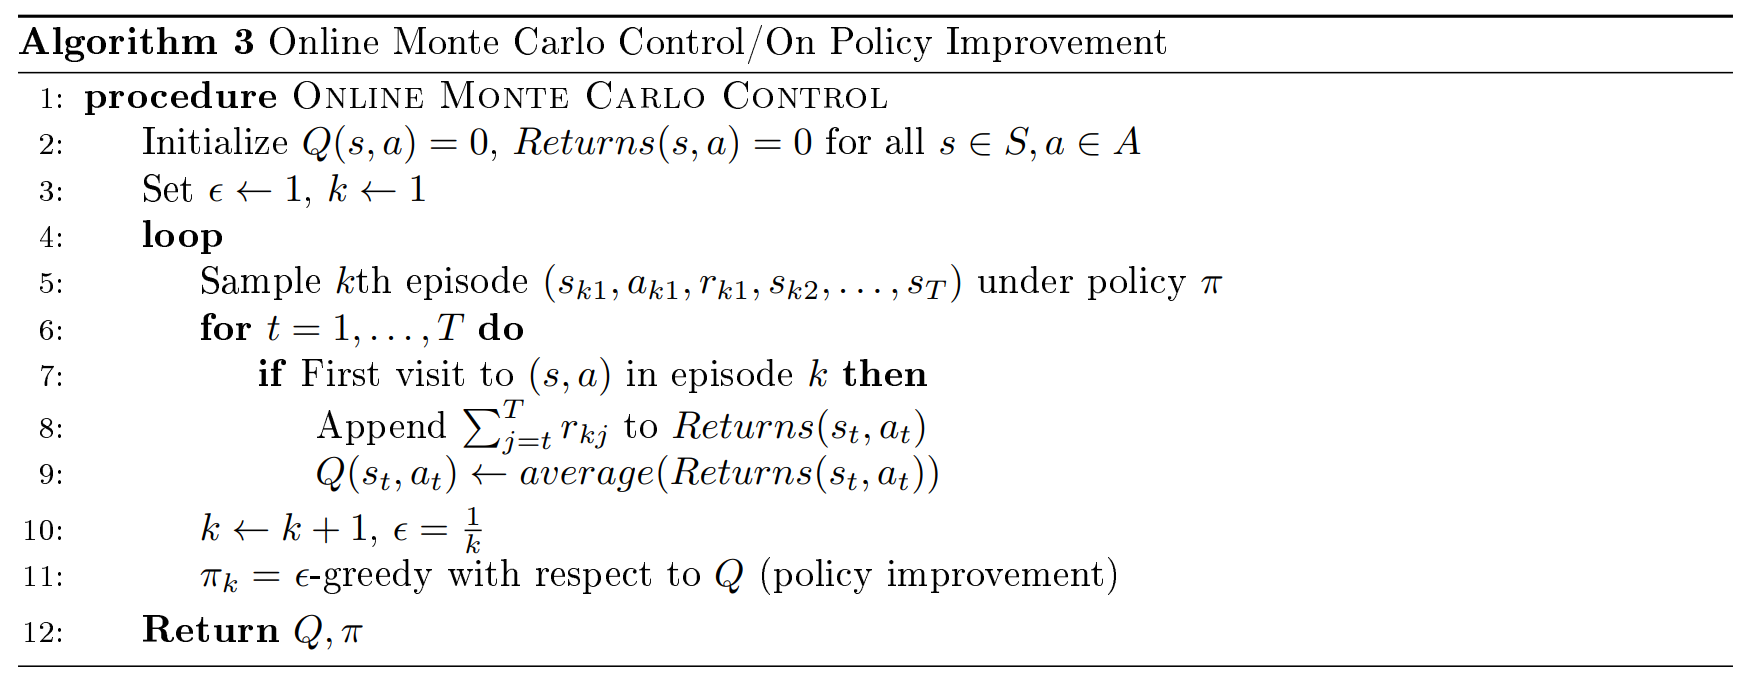 docs/stanford-cs234-notes-zh/img/fig4_alg_3.png